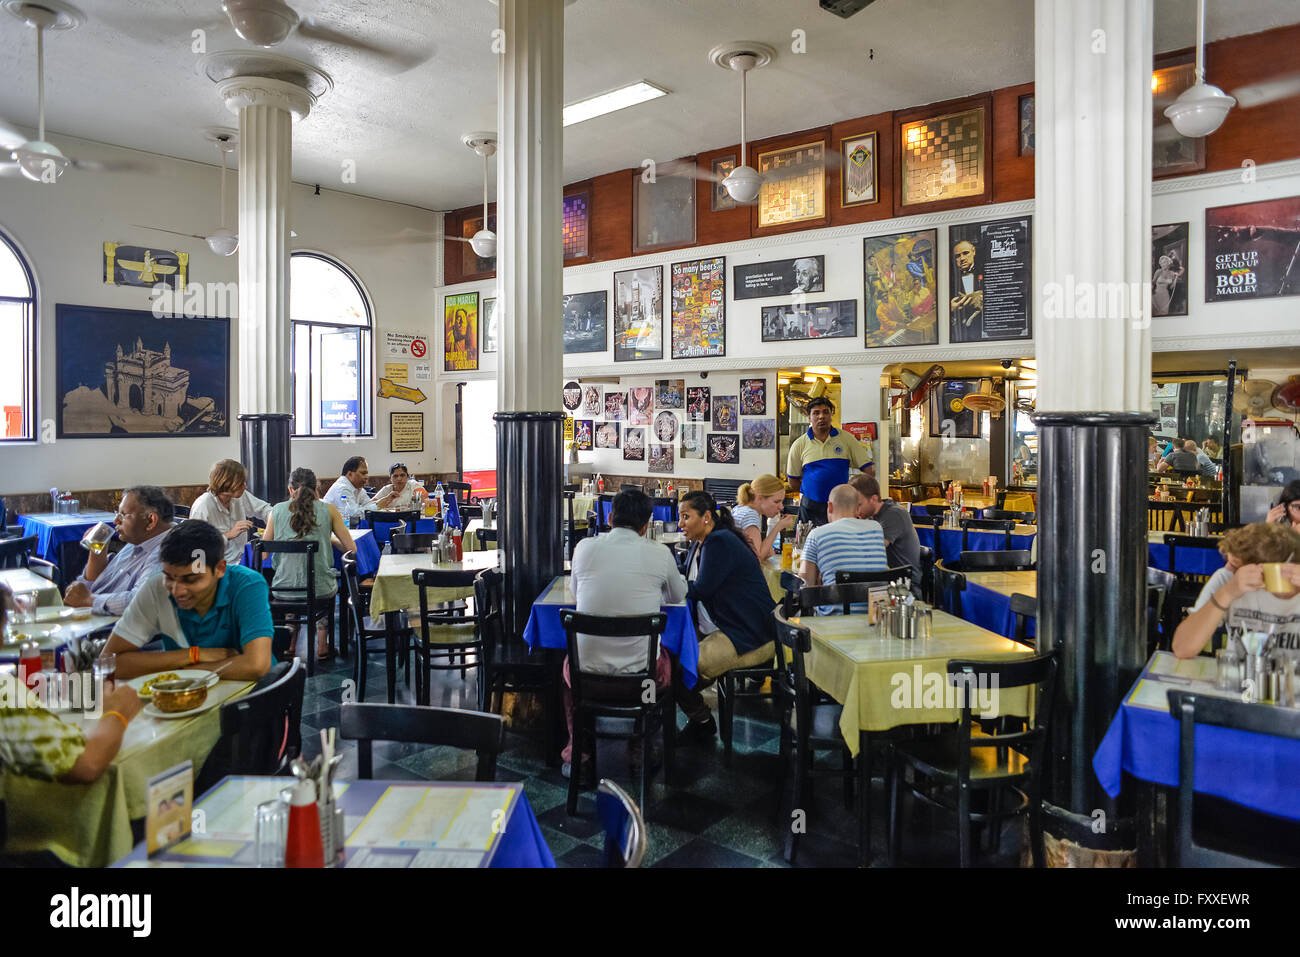 The Leopold Cafe at sundown - Picture of Leopold Cafe, Mumbai